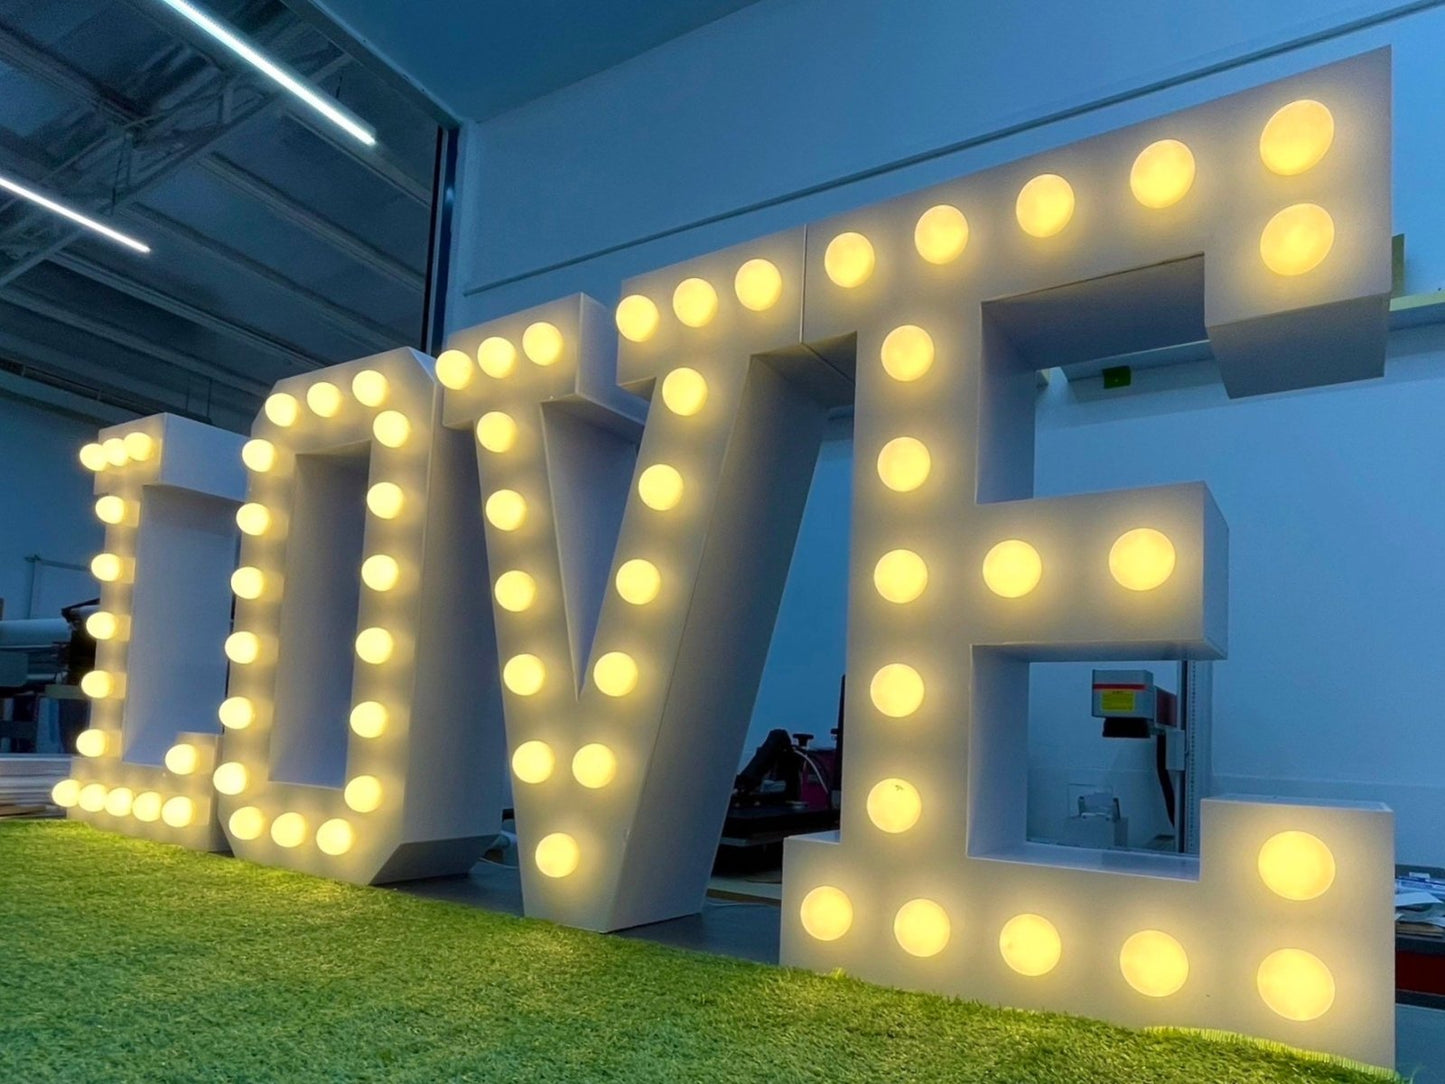 Marquee Letter Sign (LED Bulb)